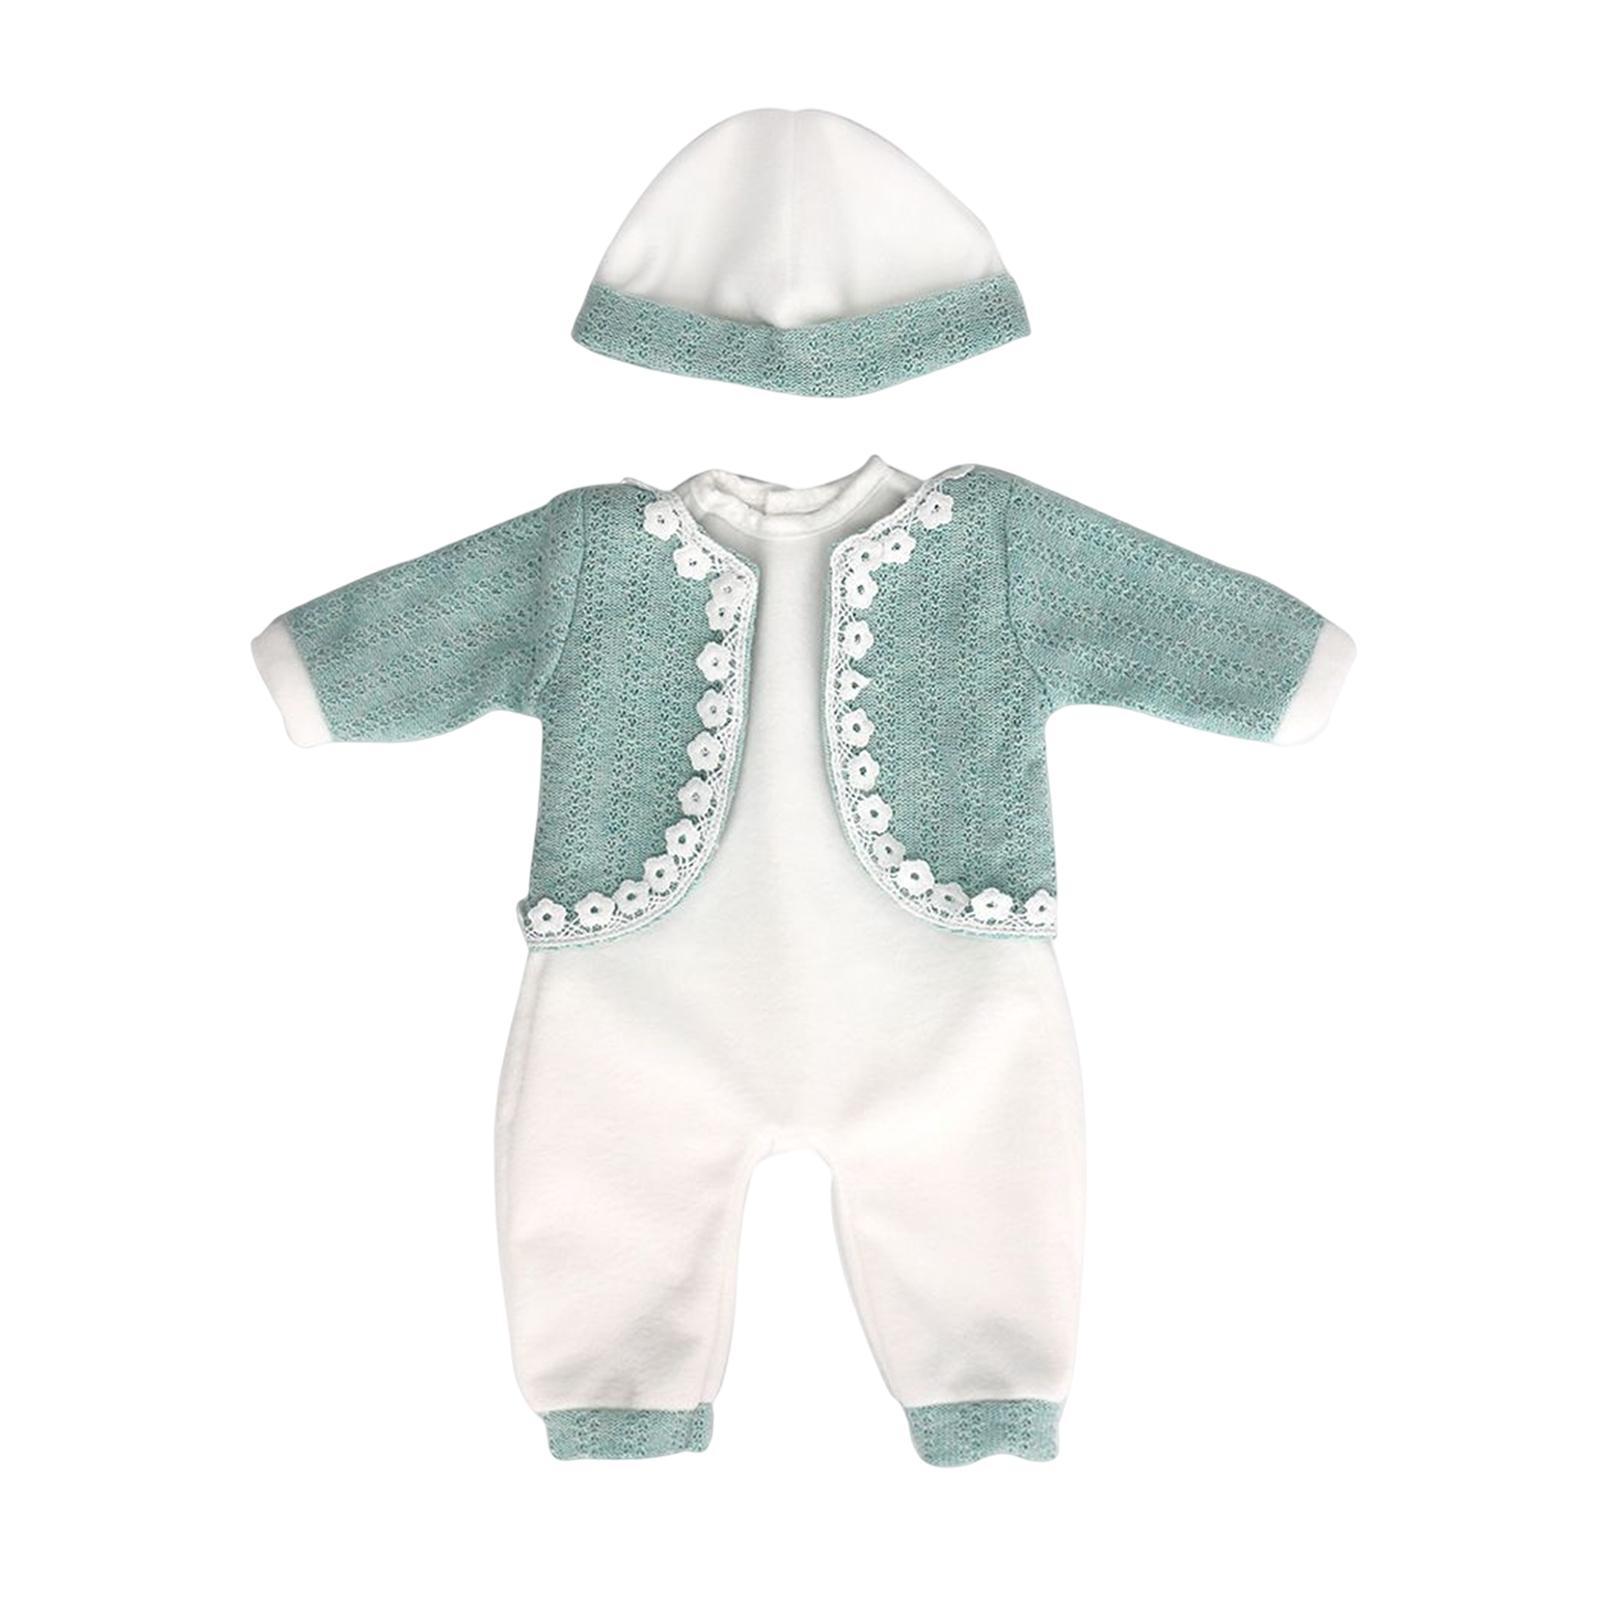 Baby Doll Clothes Accessories Doll Clothes Outfits and Accessories for Role Play